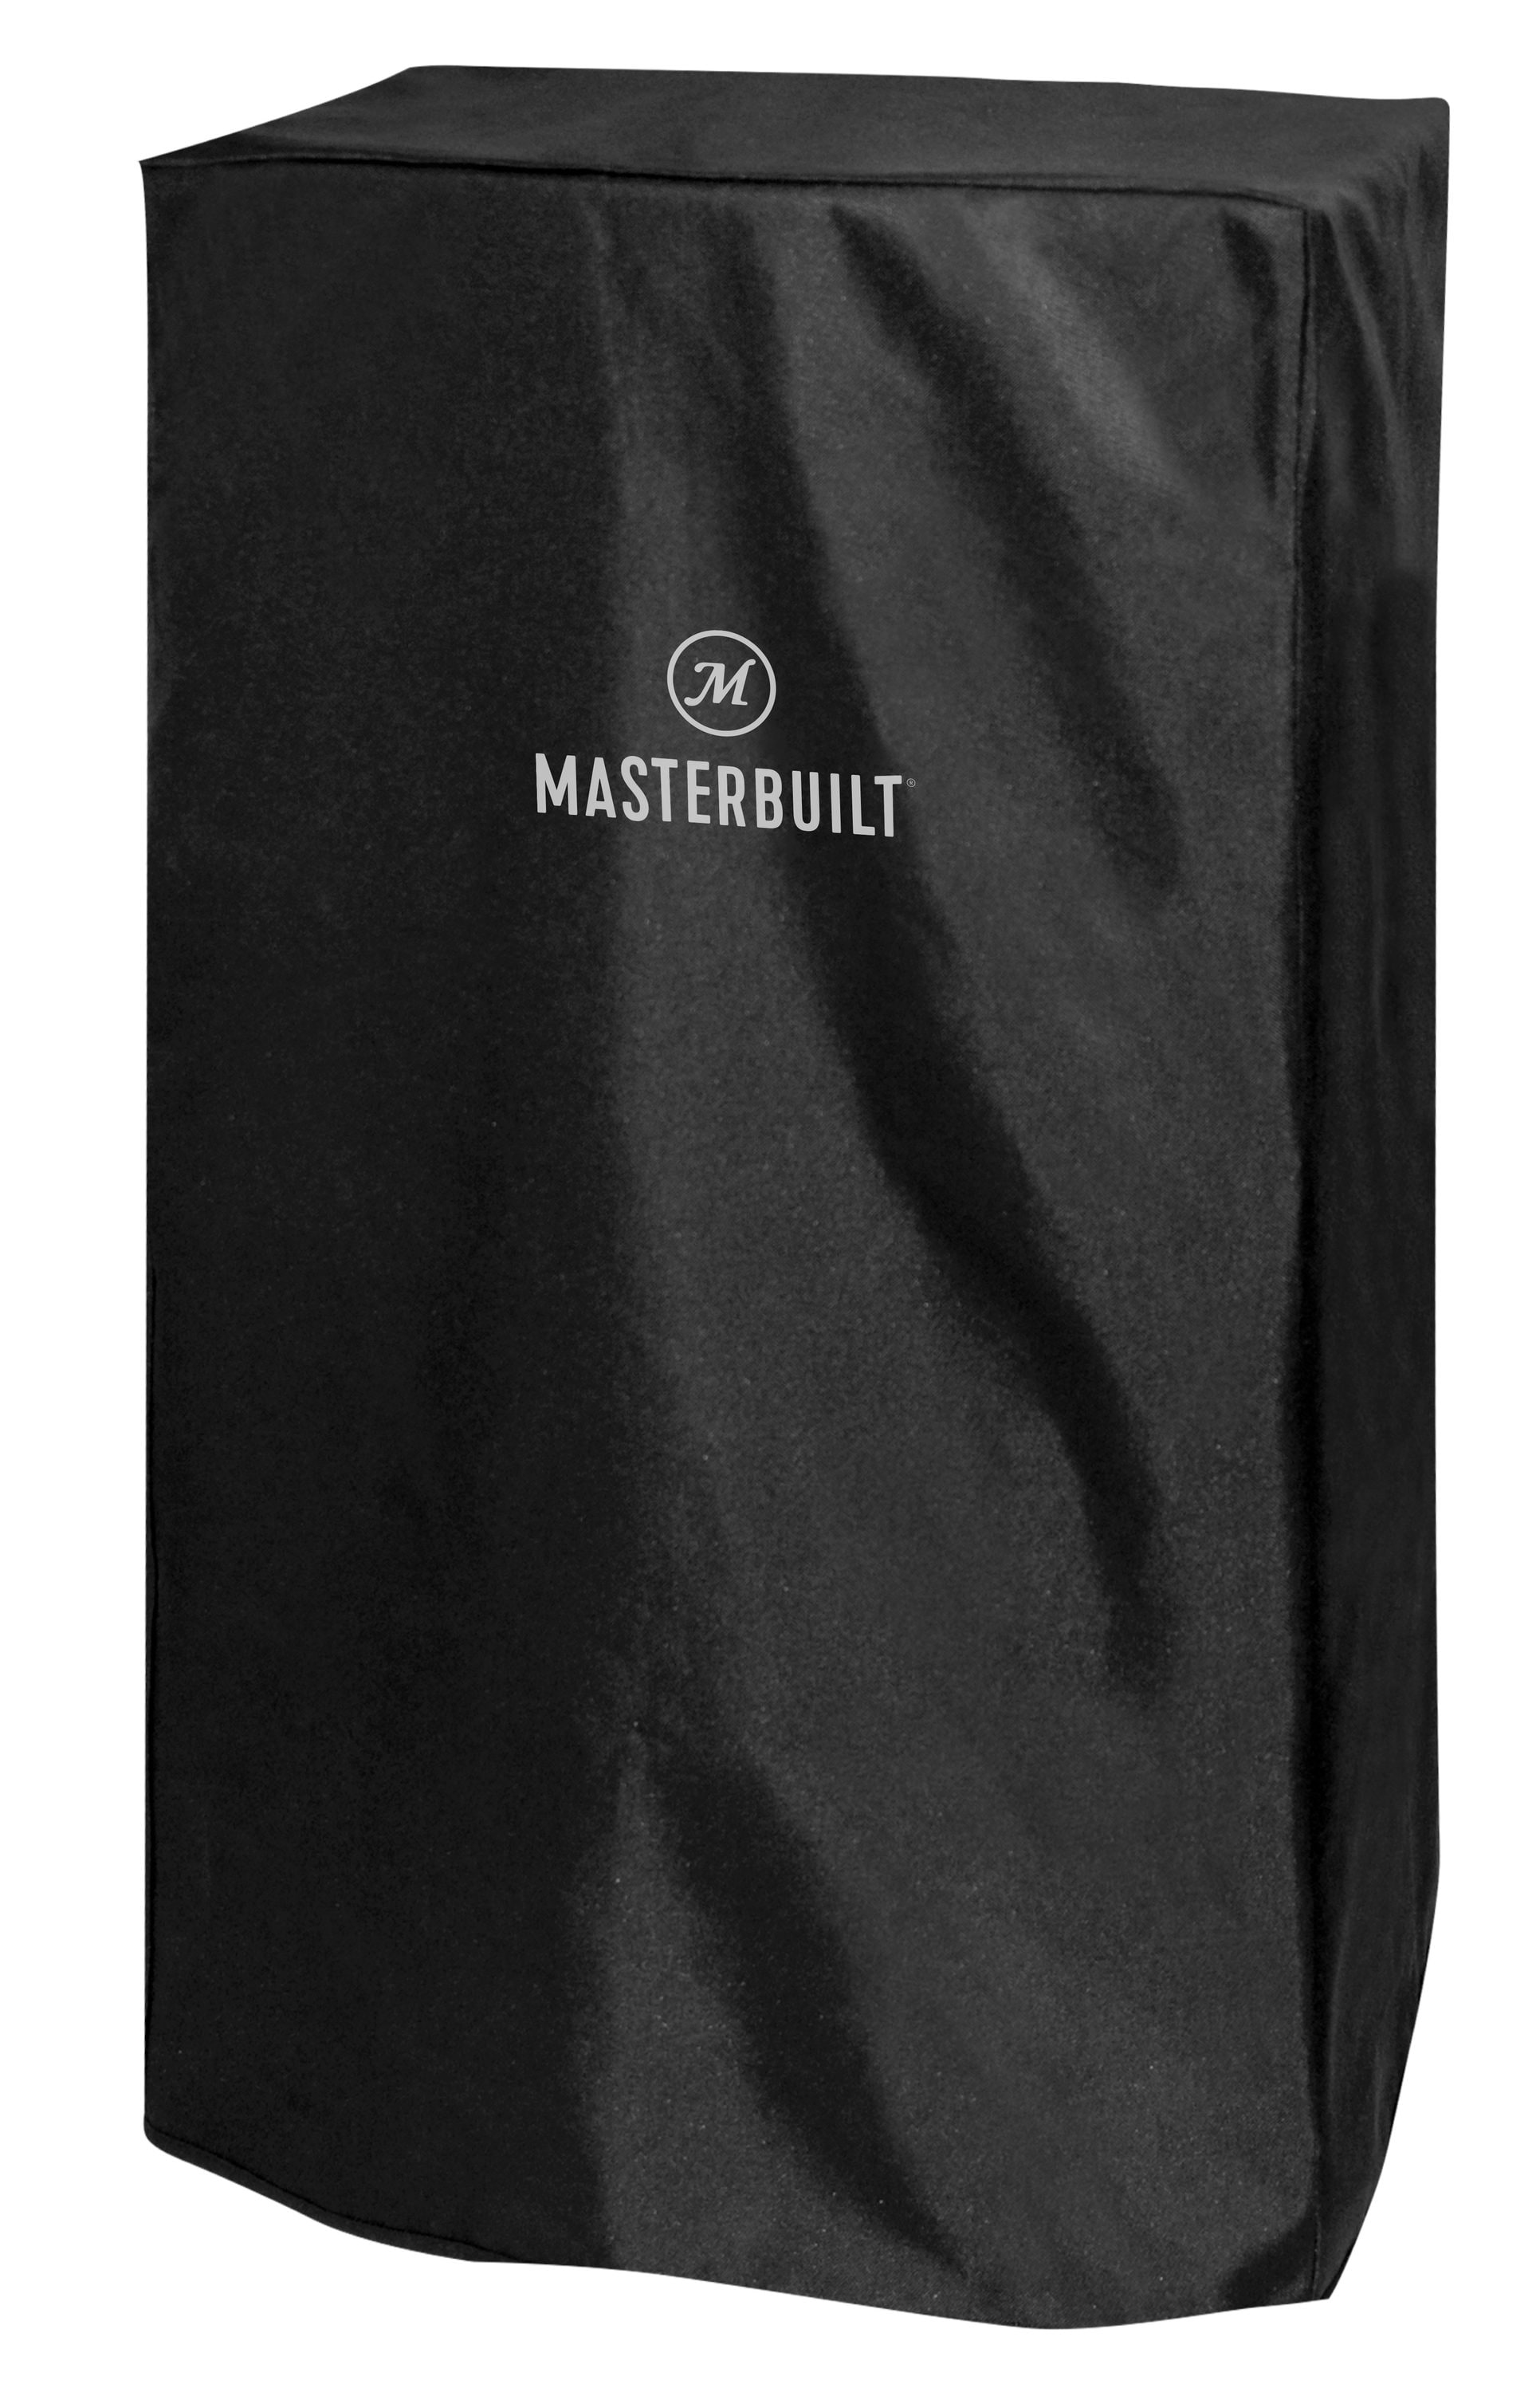 HOT Masterbuilt 30-Inch Electric Outdoor Polyester High Guality Smoker Cover ~ 